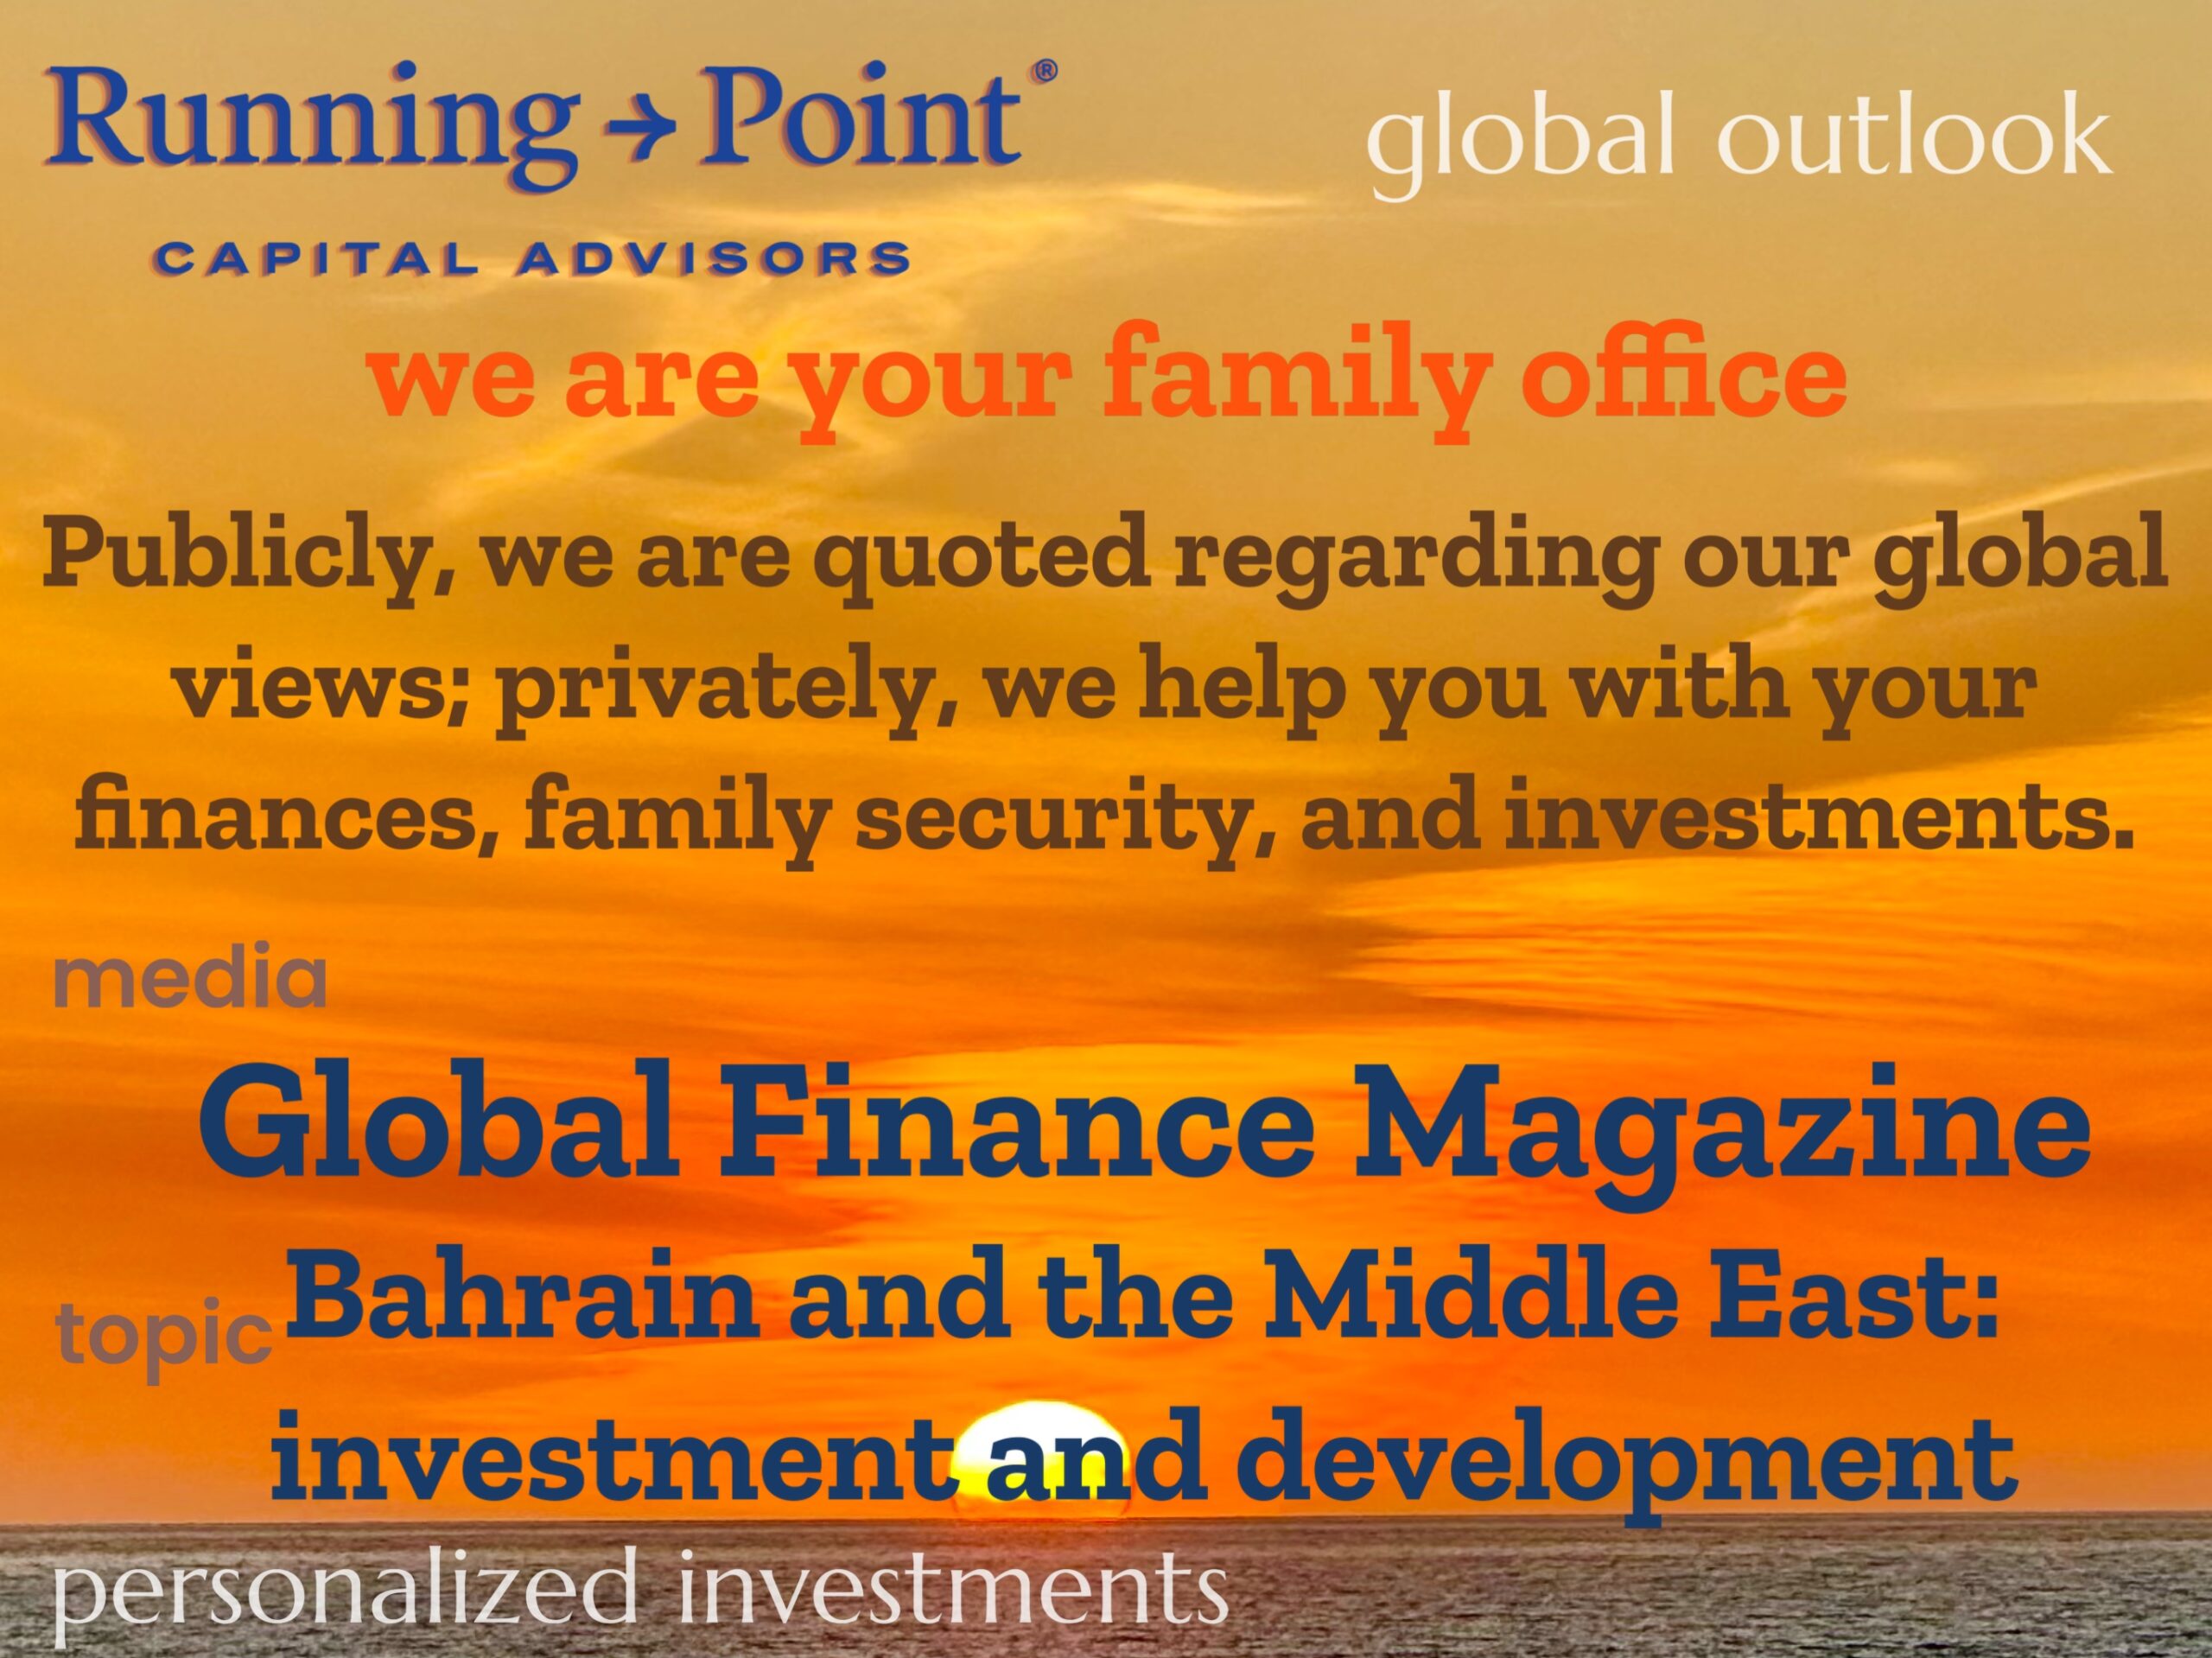 Global Finance Magazine: Bahrain and the Middle East